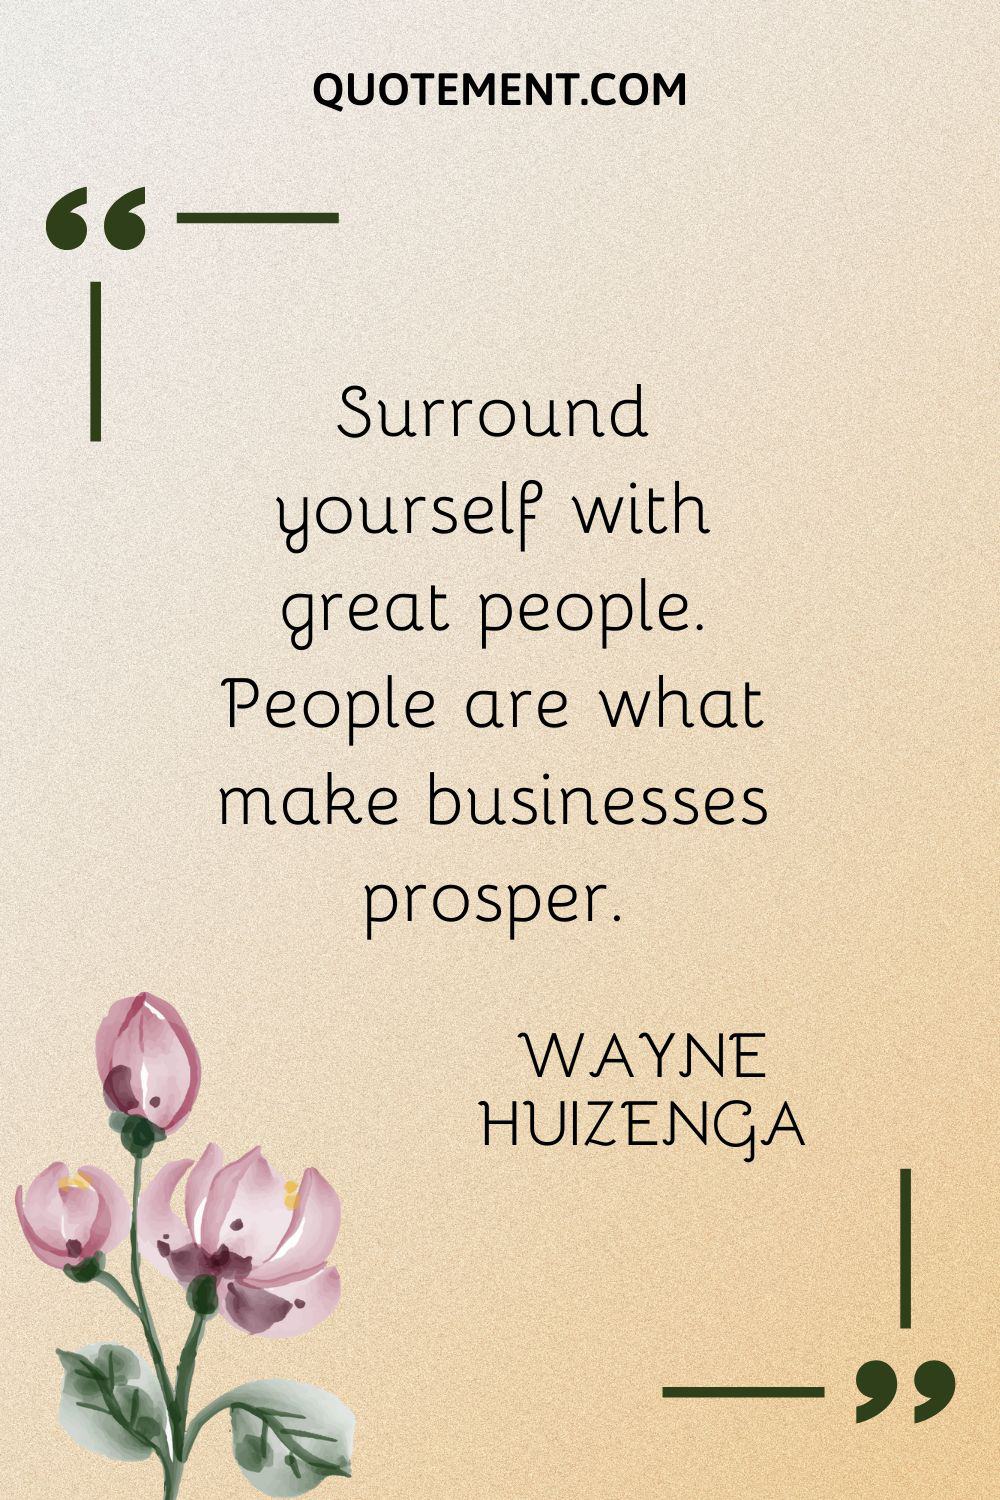 Surround yourself with great people